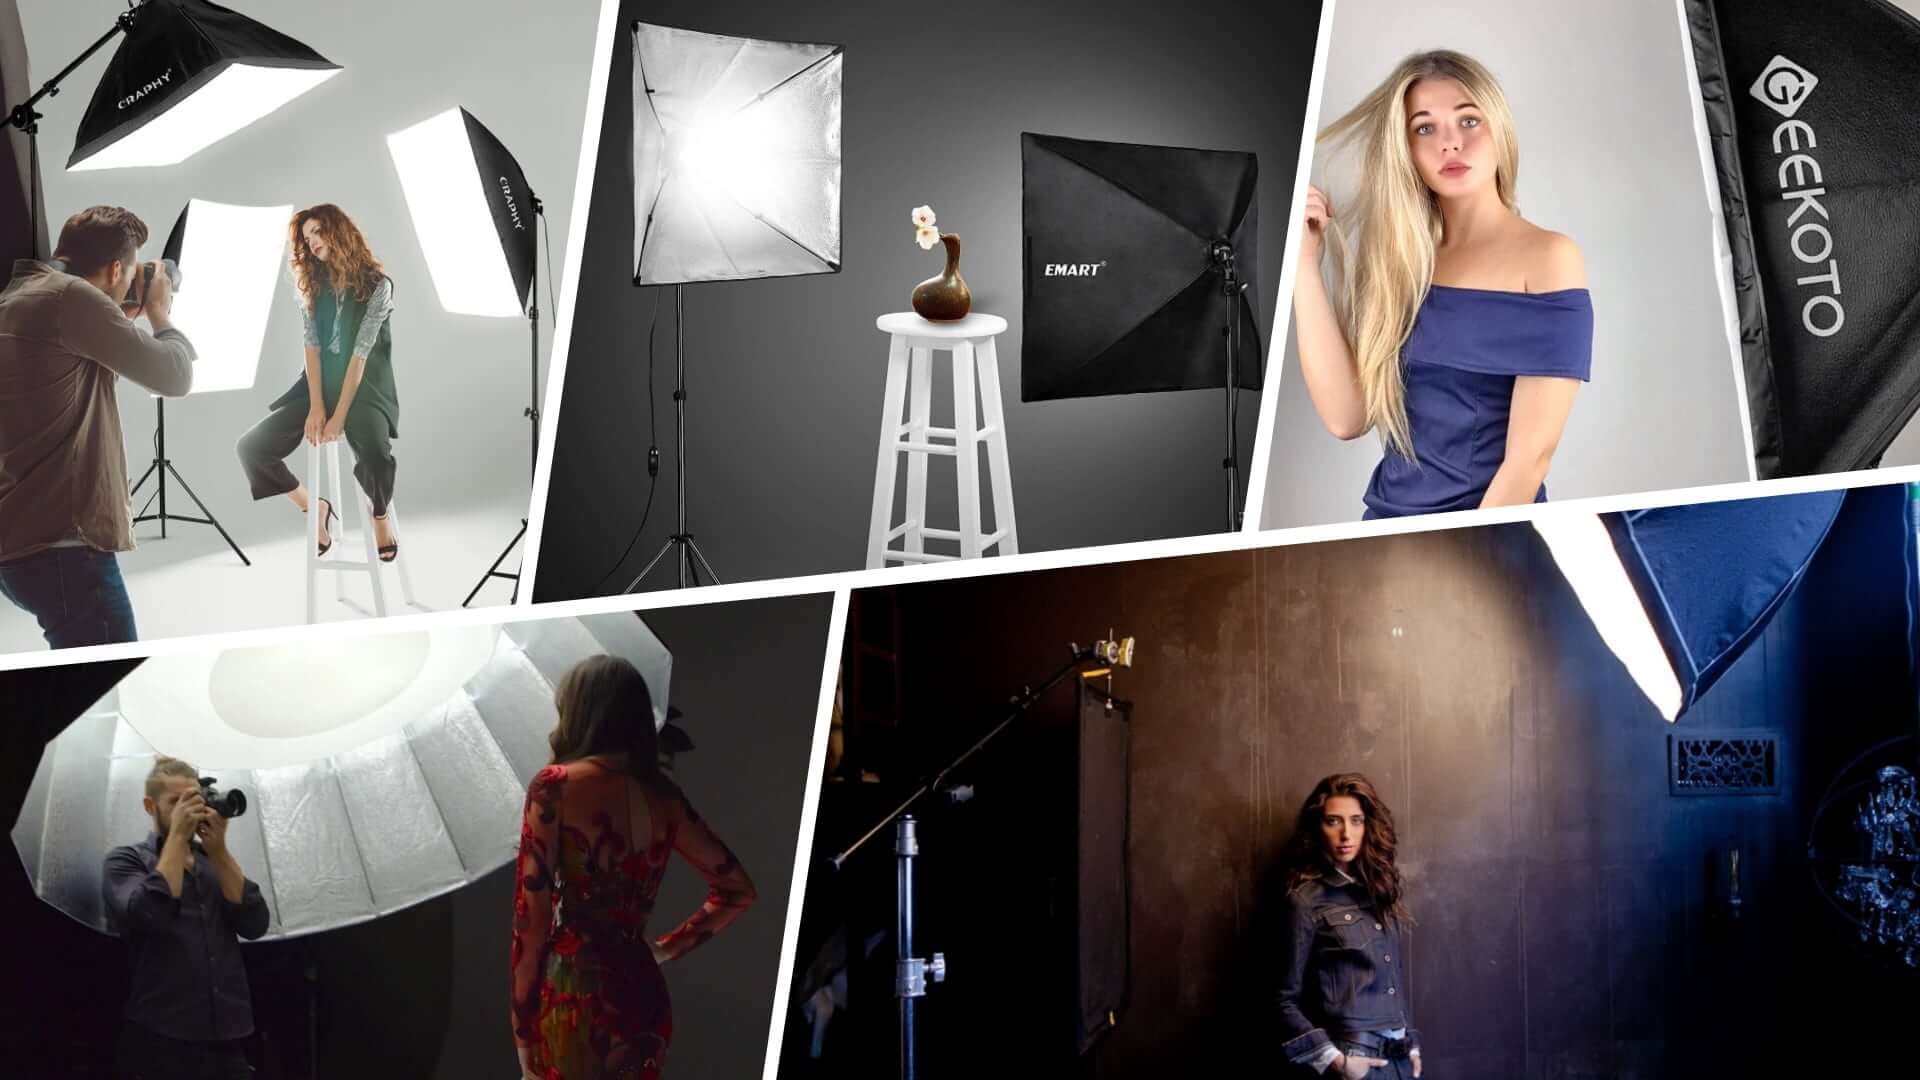 Ring Light VS Softbox  Which One Is Right For You?